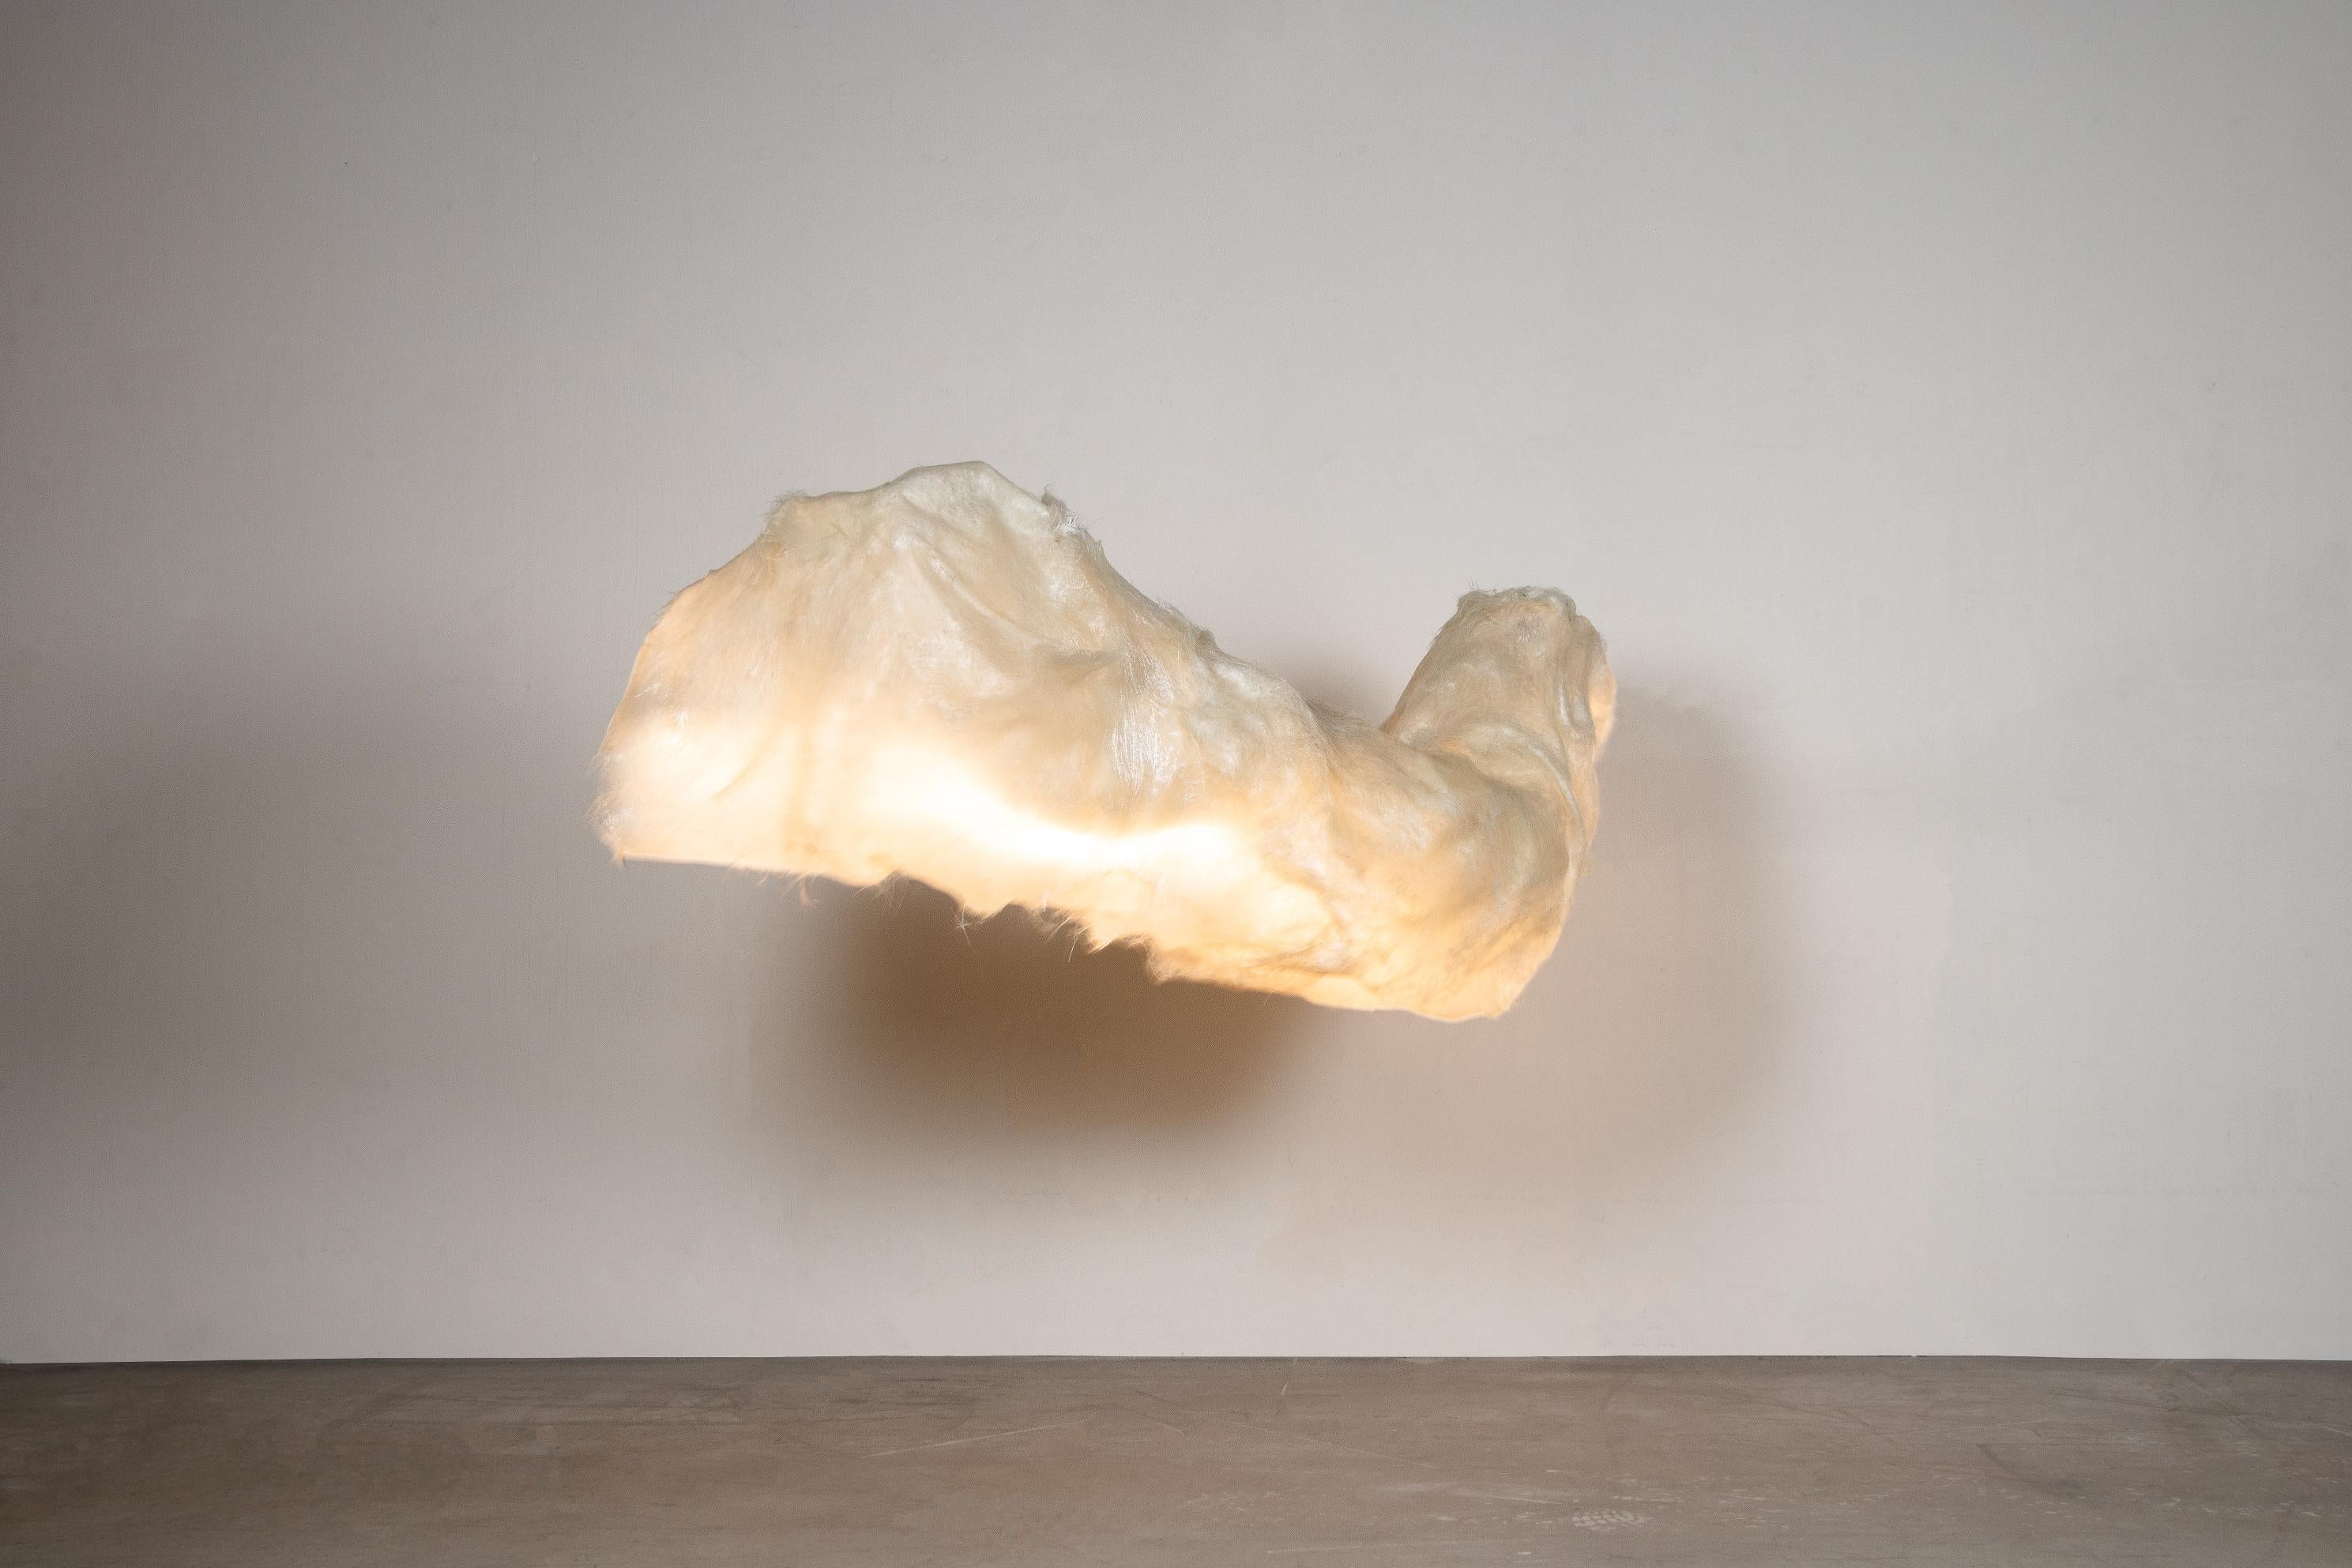 Liv lamp by Lucas Morten
2019
Limited Edition of 8
Dimensions: W 120, D 60, H 60 cm
Material: fiberglass

Liv Lamp symbolizes a thriving organism channeling its energy through light. A prepequisite for organisms to survive is alteration which